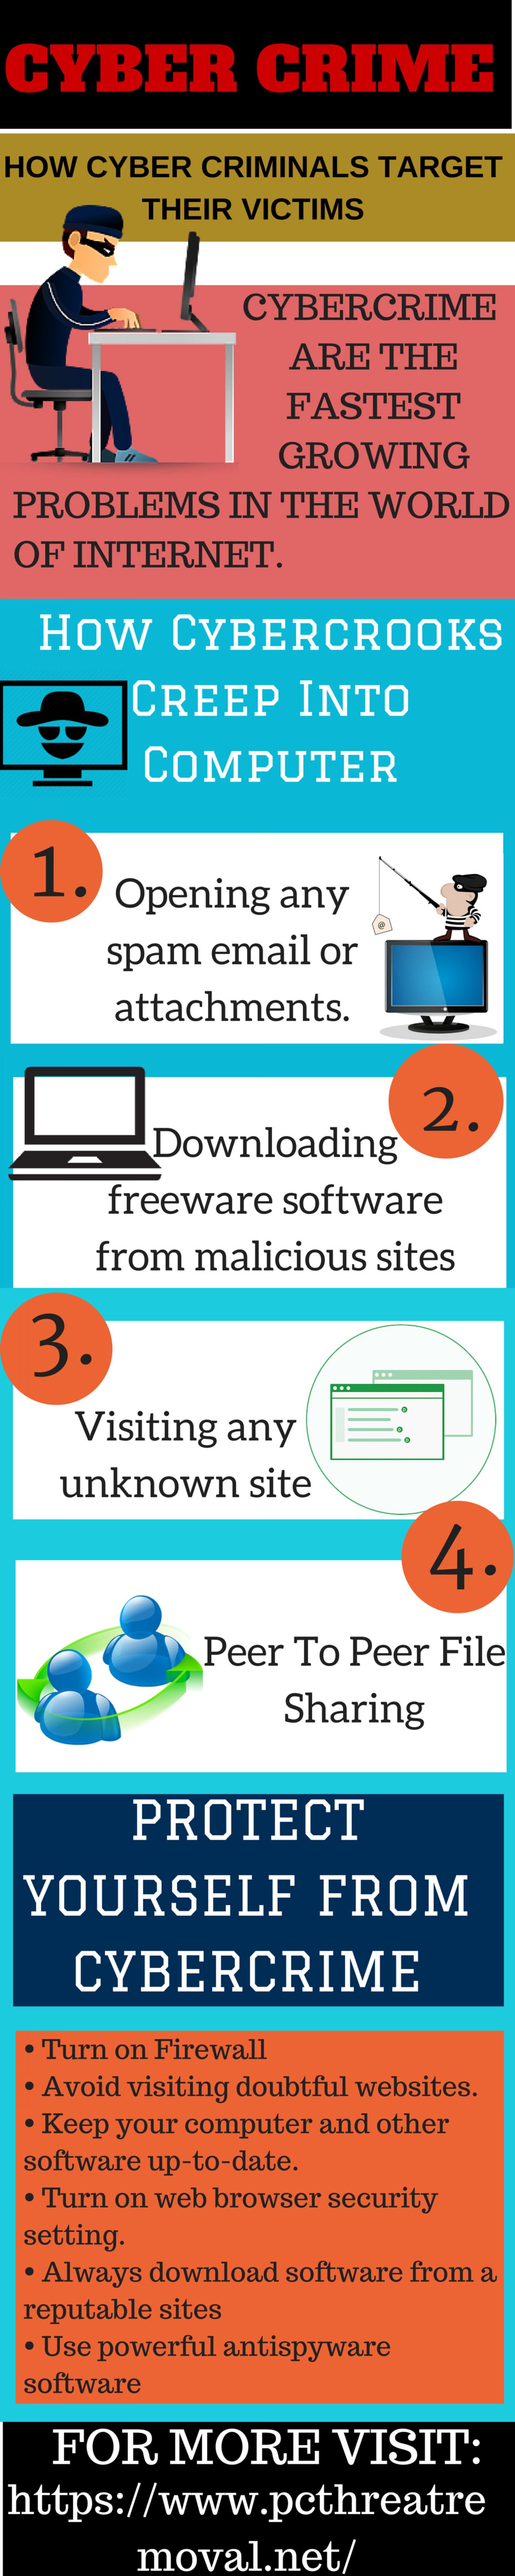 How To Stay Away From Cybercriminals Infographic